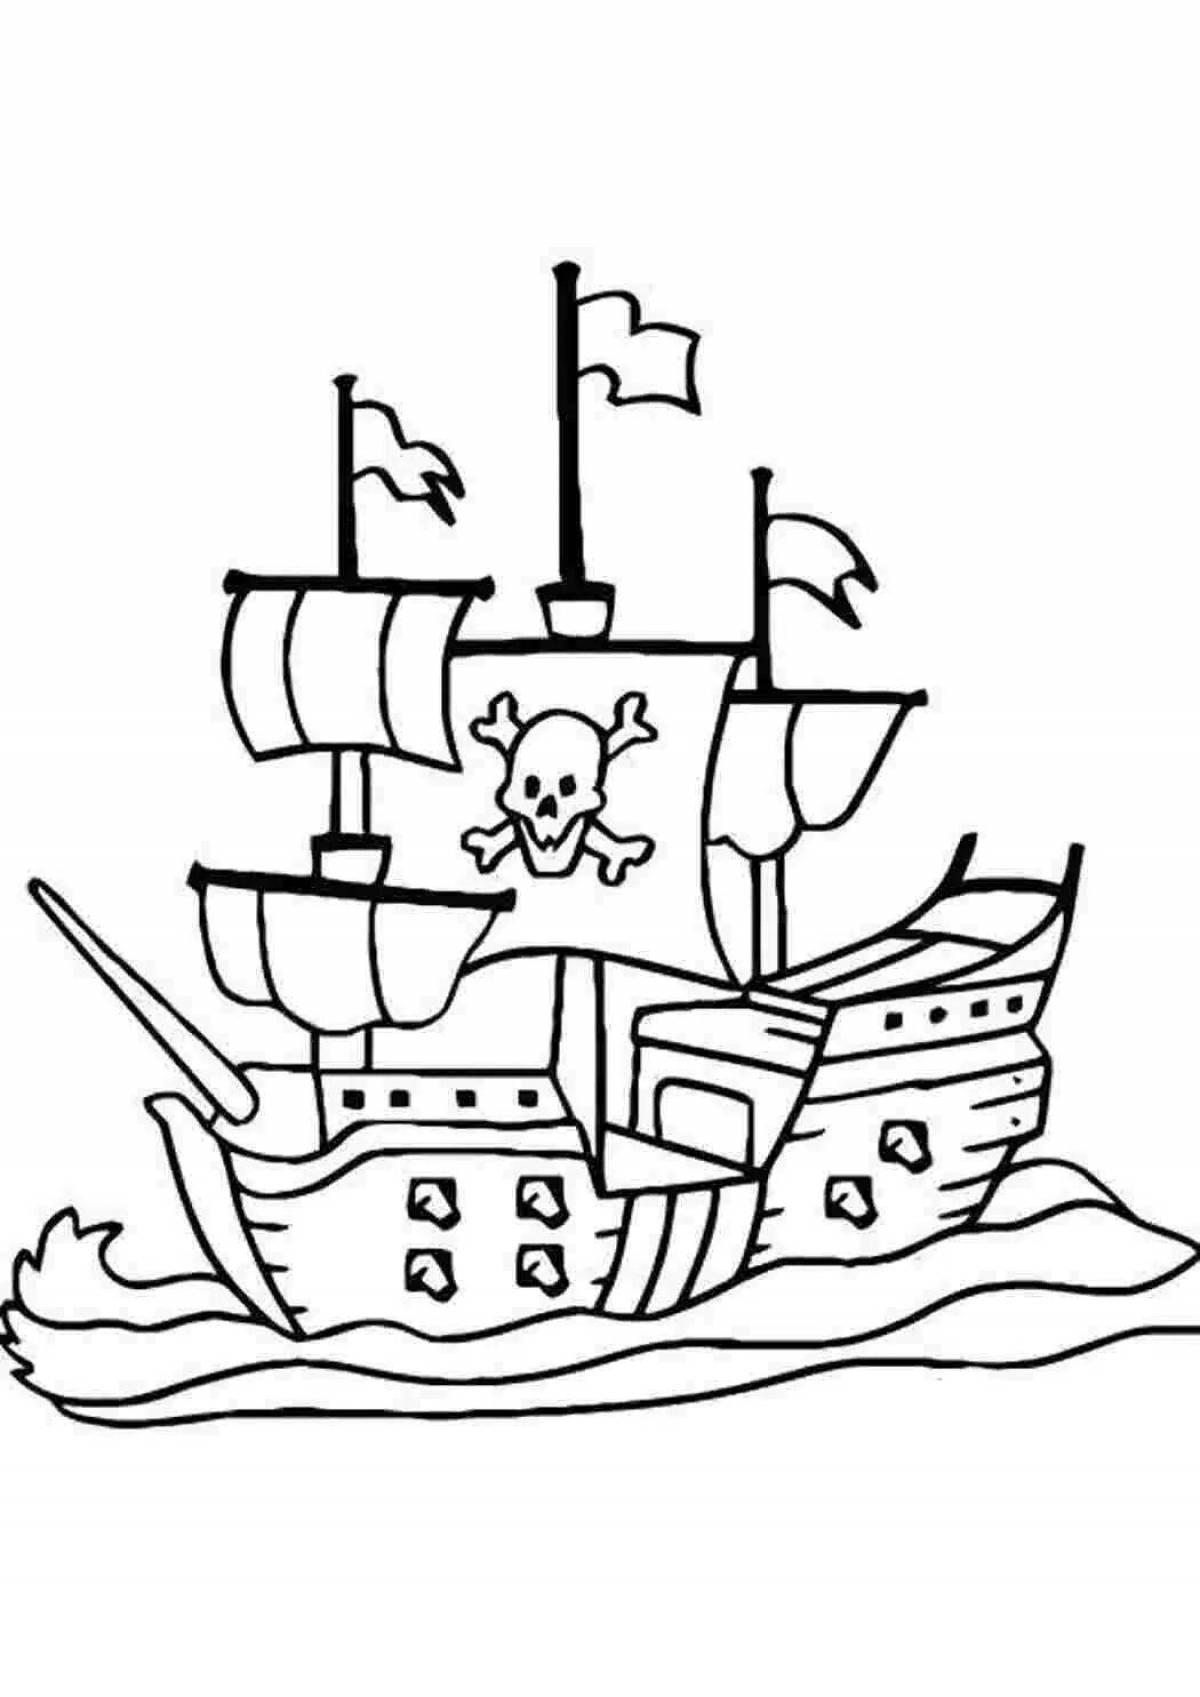 Majestic pirate ship coloring book for kids